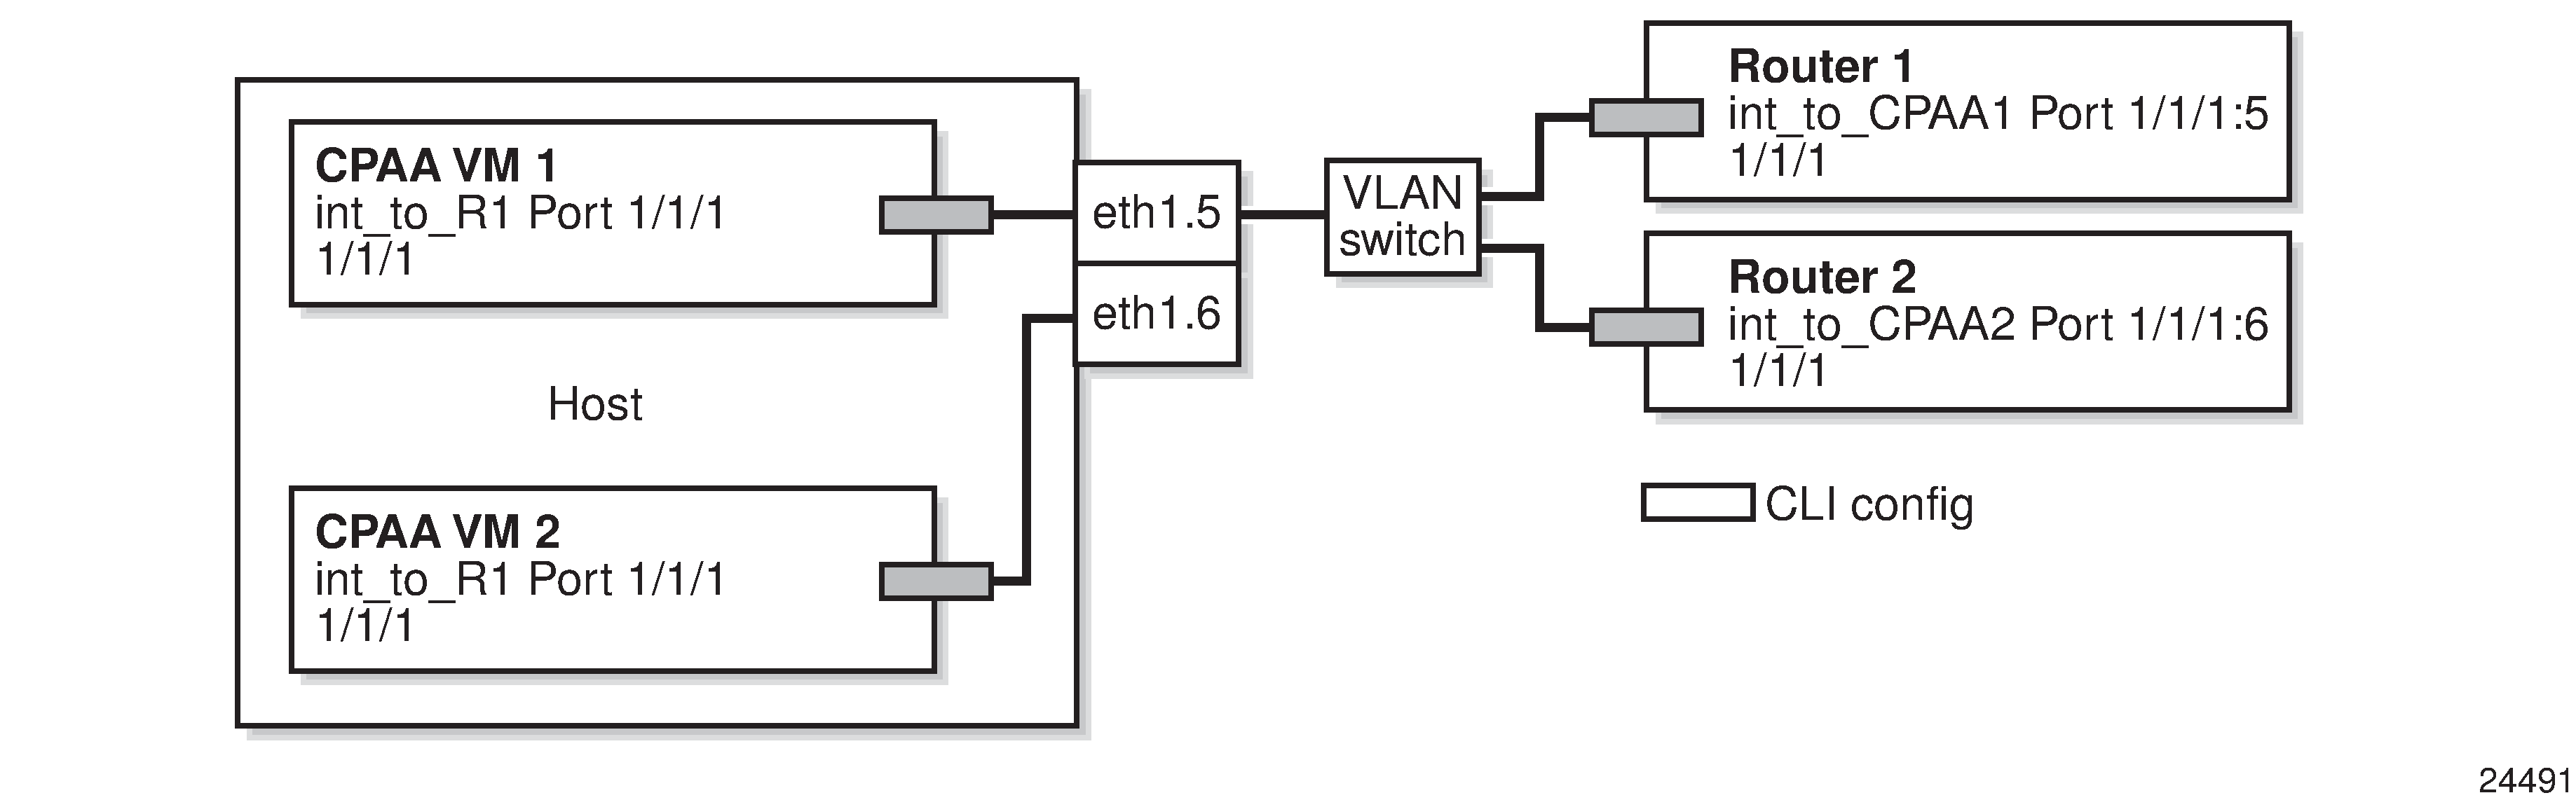 vCPAA direct interface model using sub-interfaces deployment